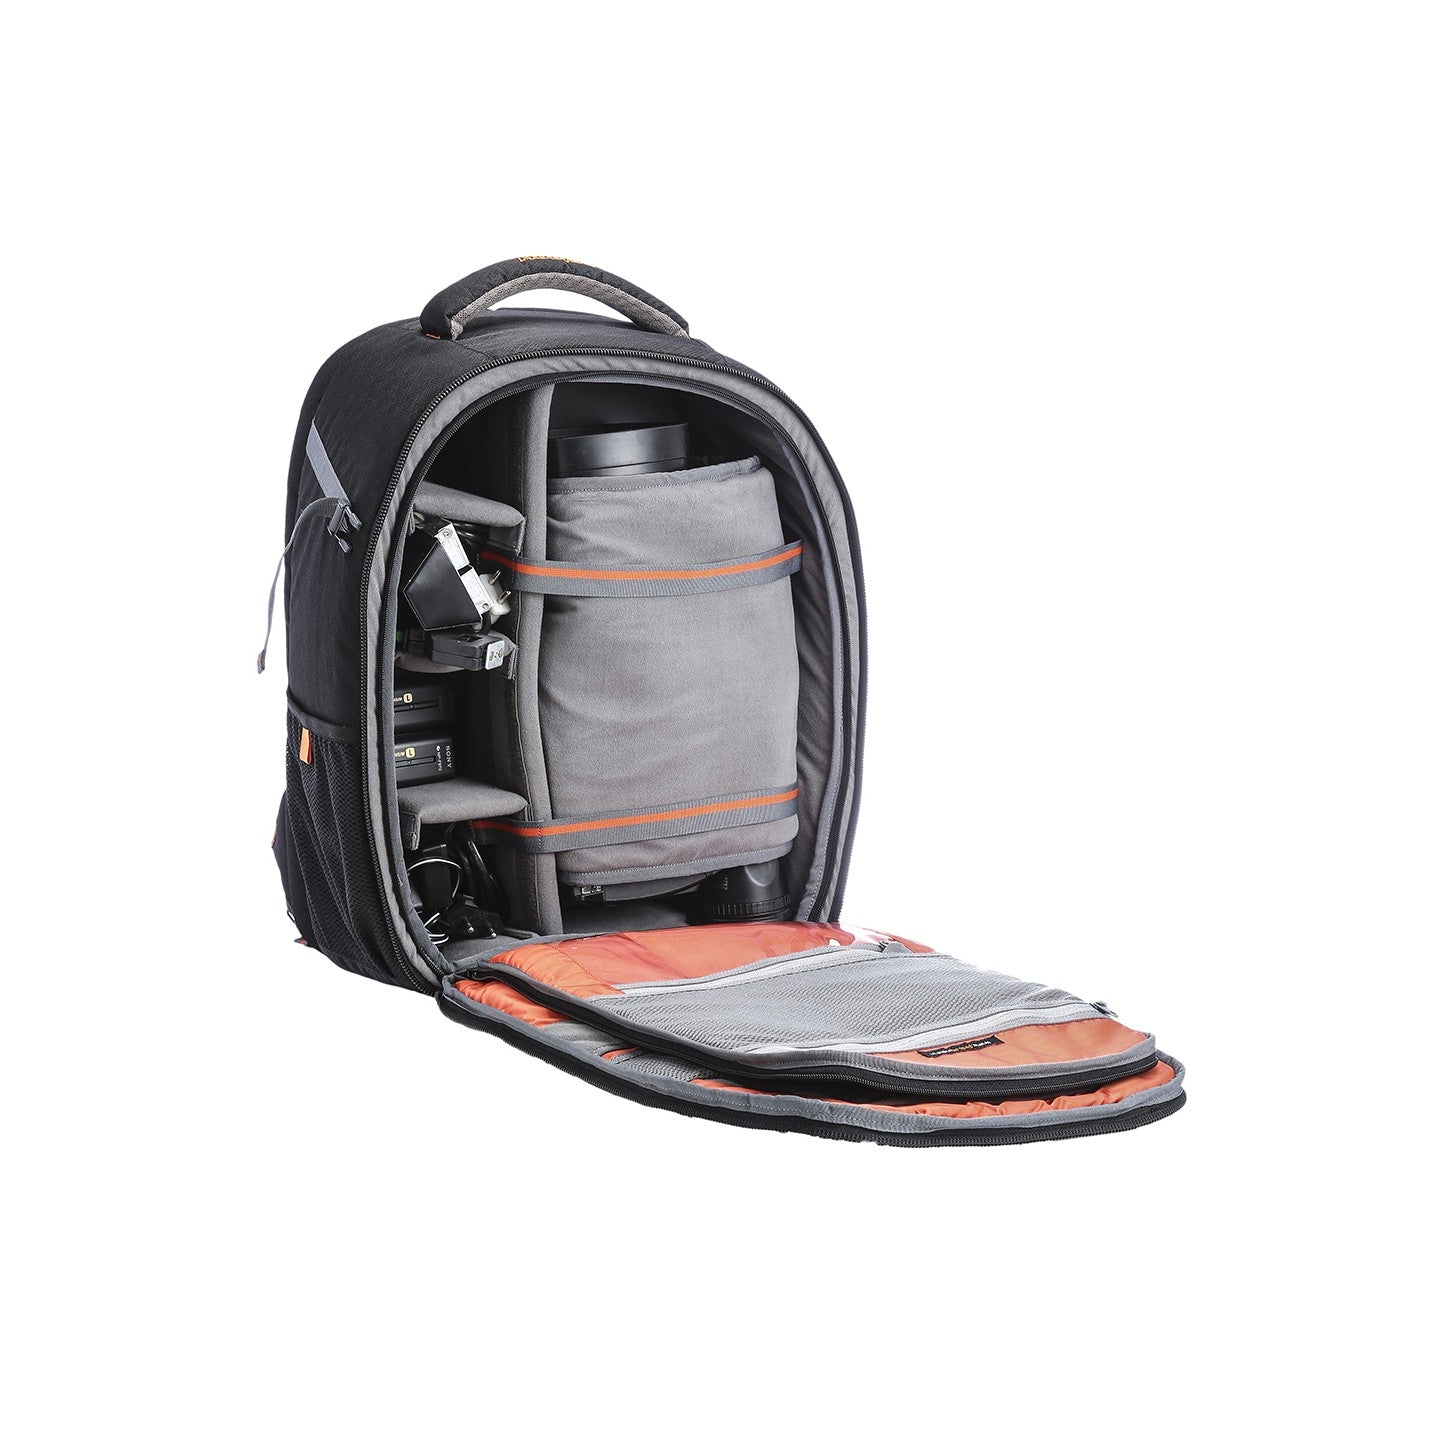 Image: Open view of the P37 Torino 2 video camera bag, revealing its spacious compartments filled with video cameras and various equipment. The bag's dedicated storage areas and customizable dividers ensure secure and organized placement of your gear. Stay prepared and ready to capture professional-quality footage with the P37 Torino 2.